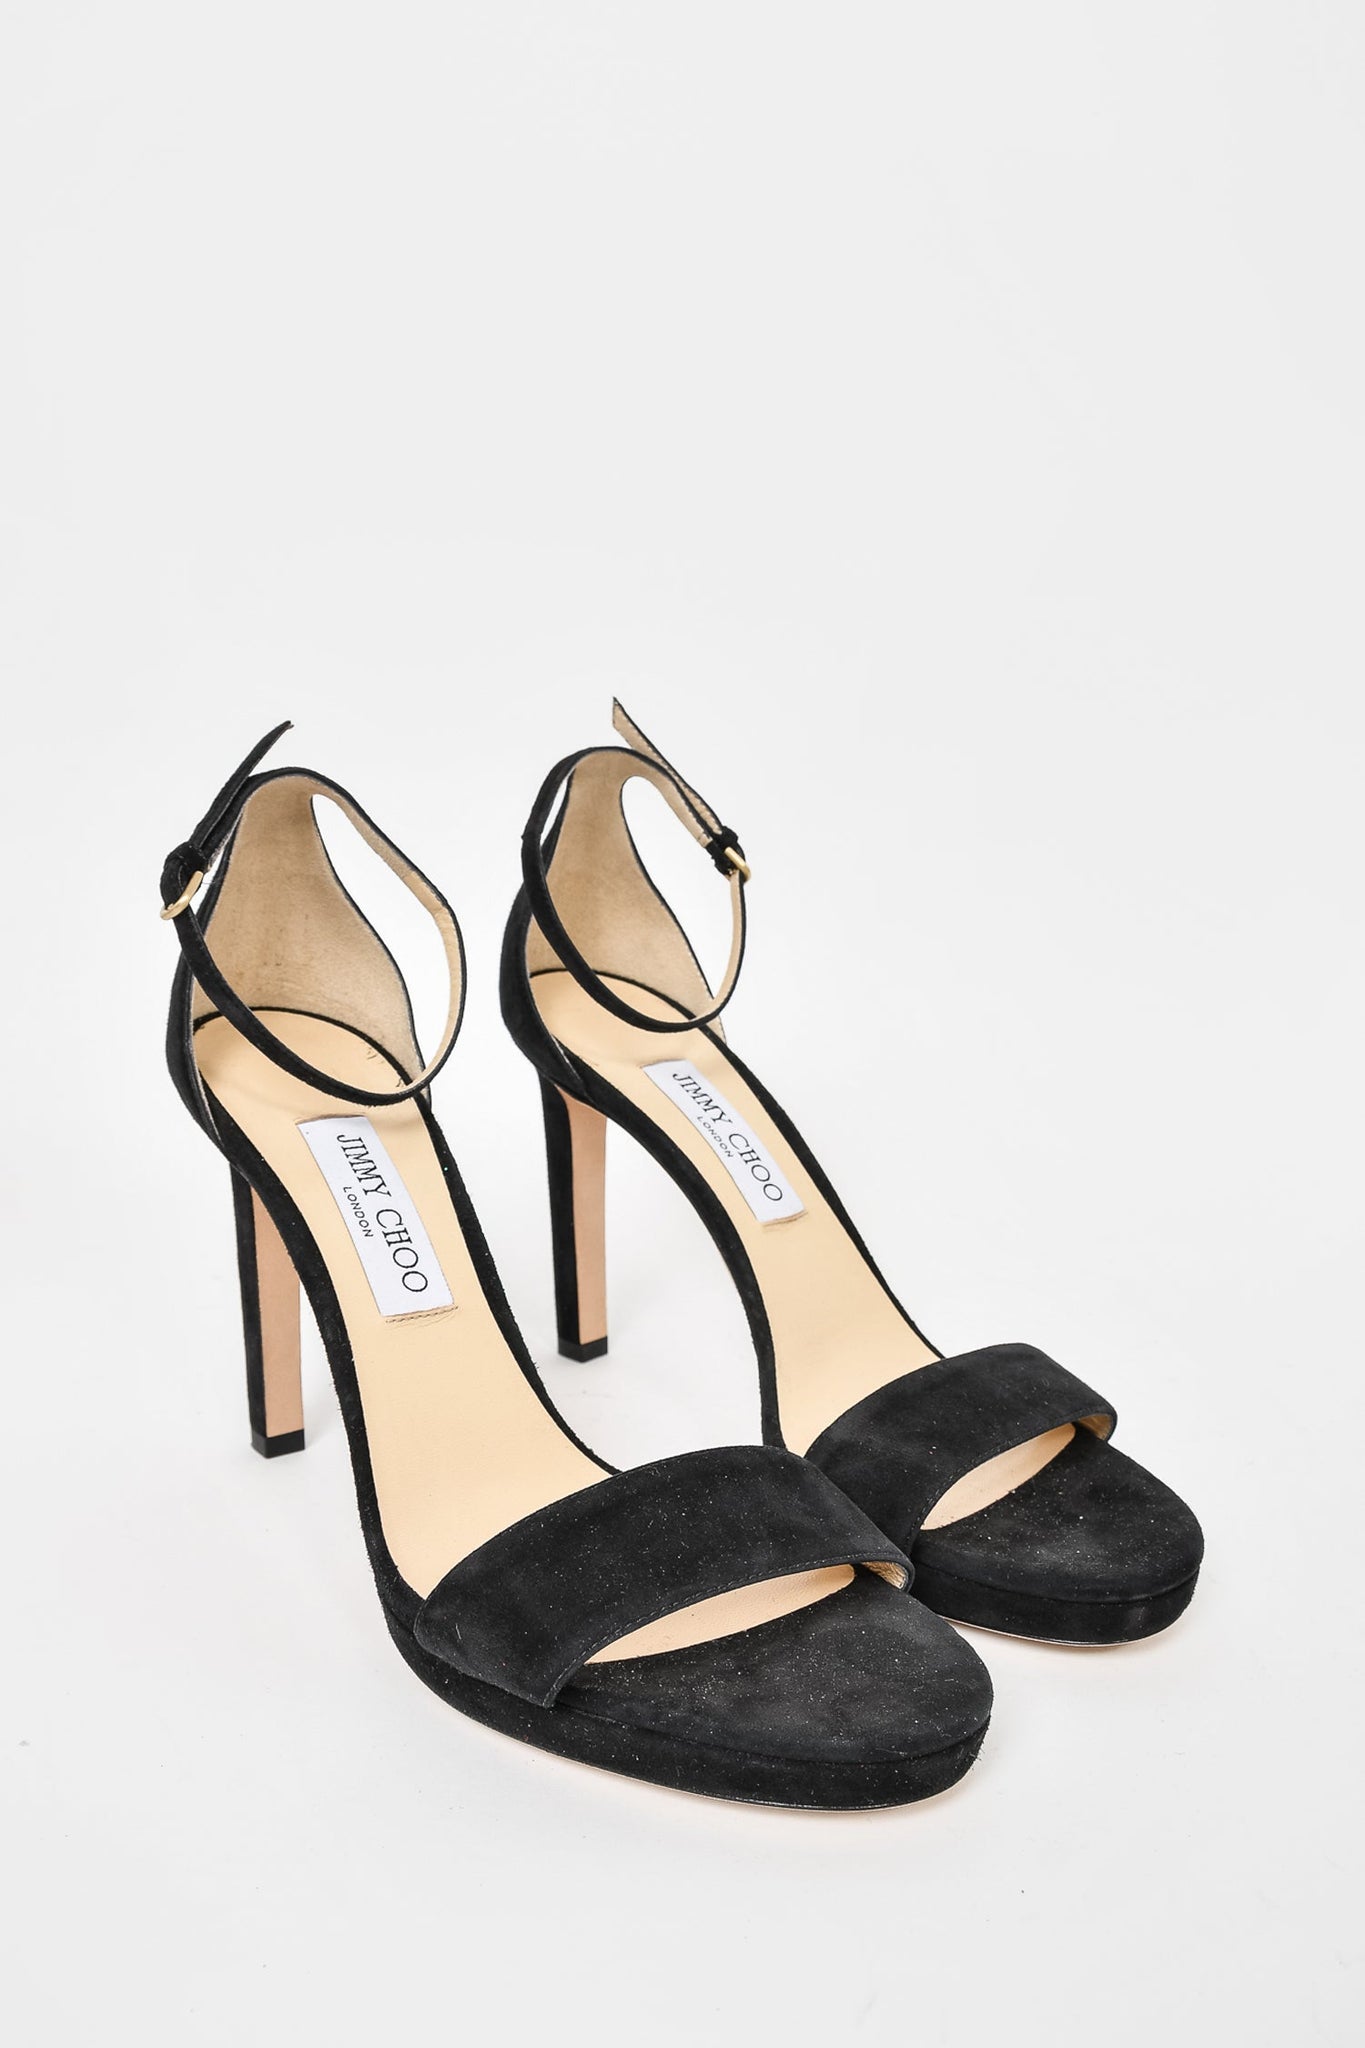 & OTHER STORIES Suede Ankle Strap Heel | Endource